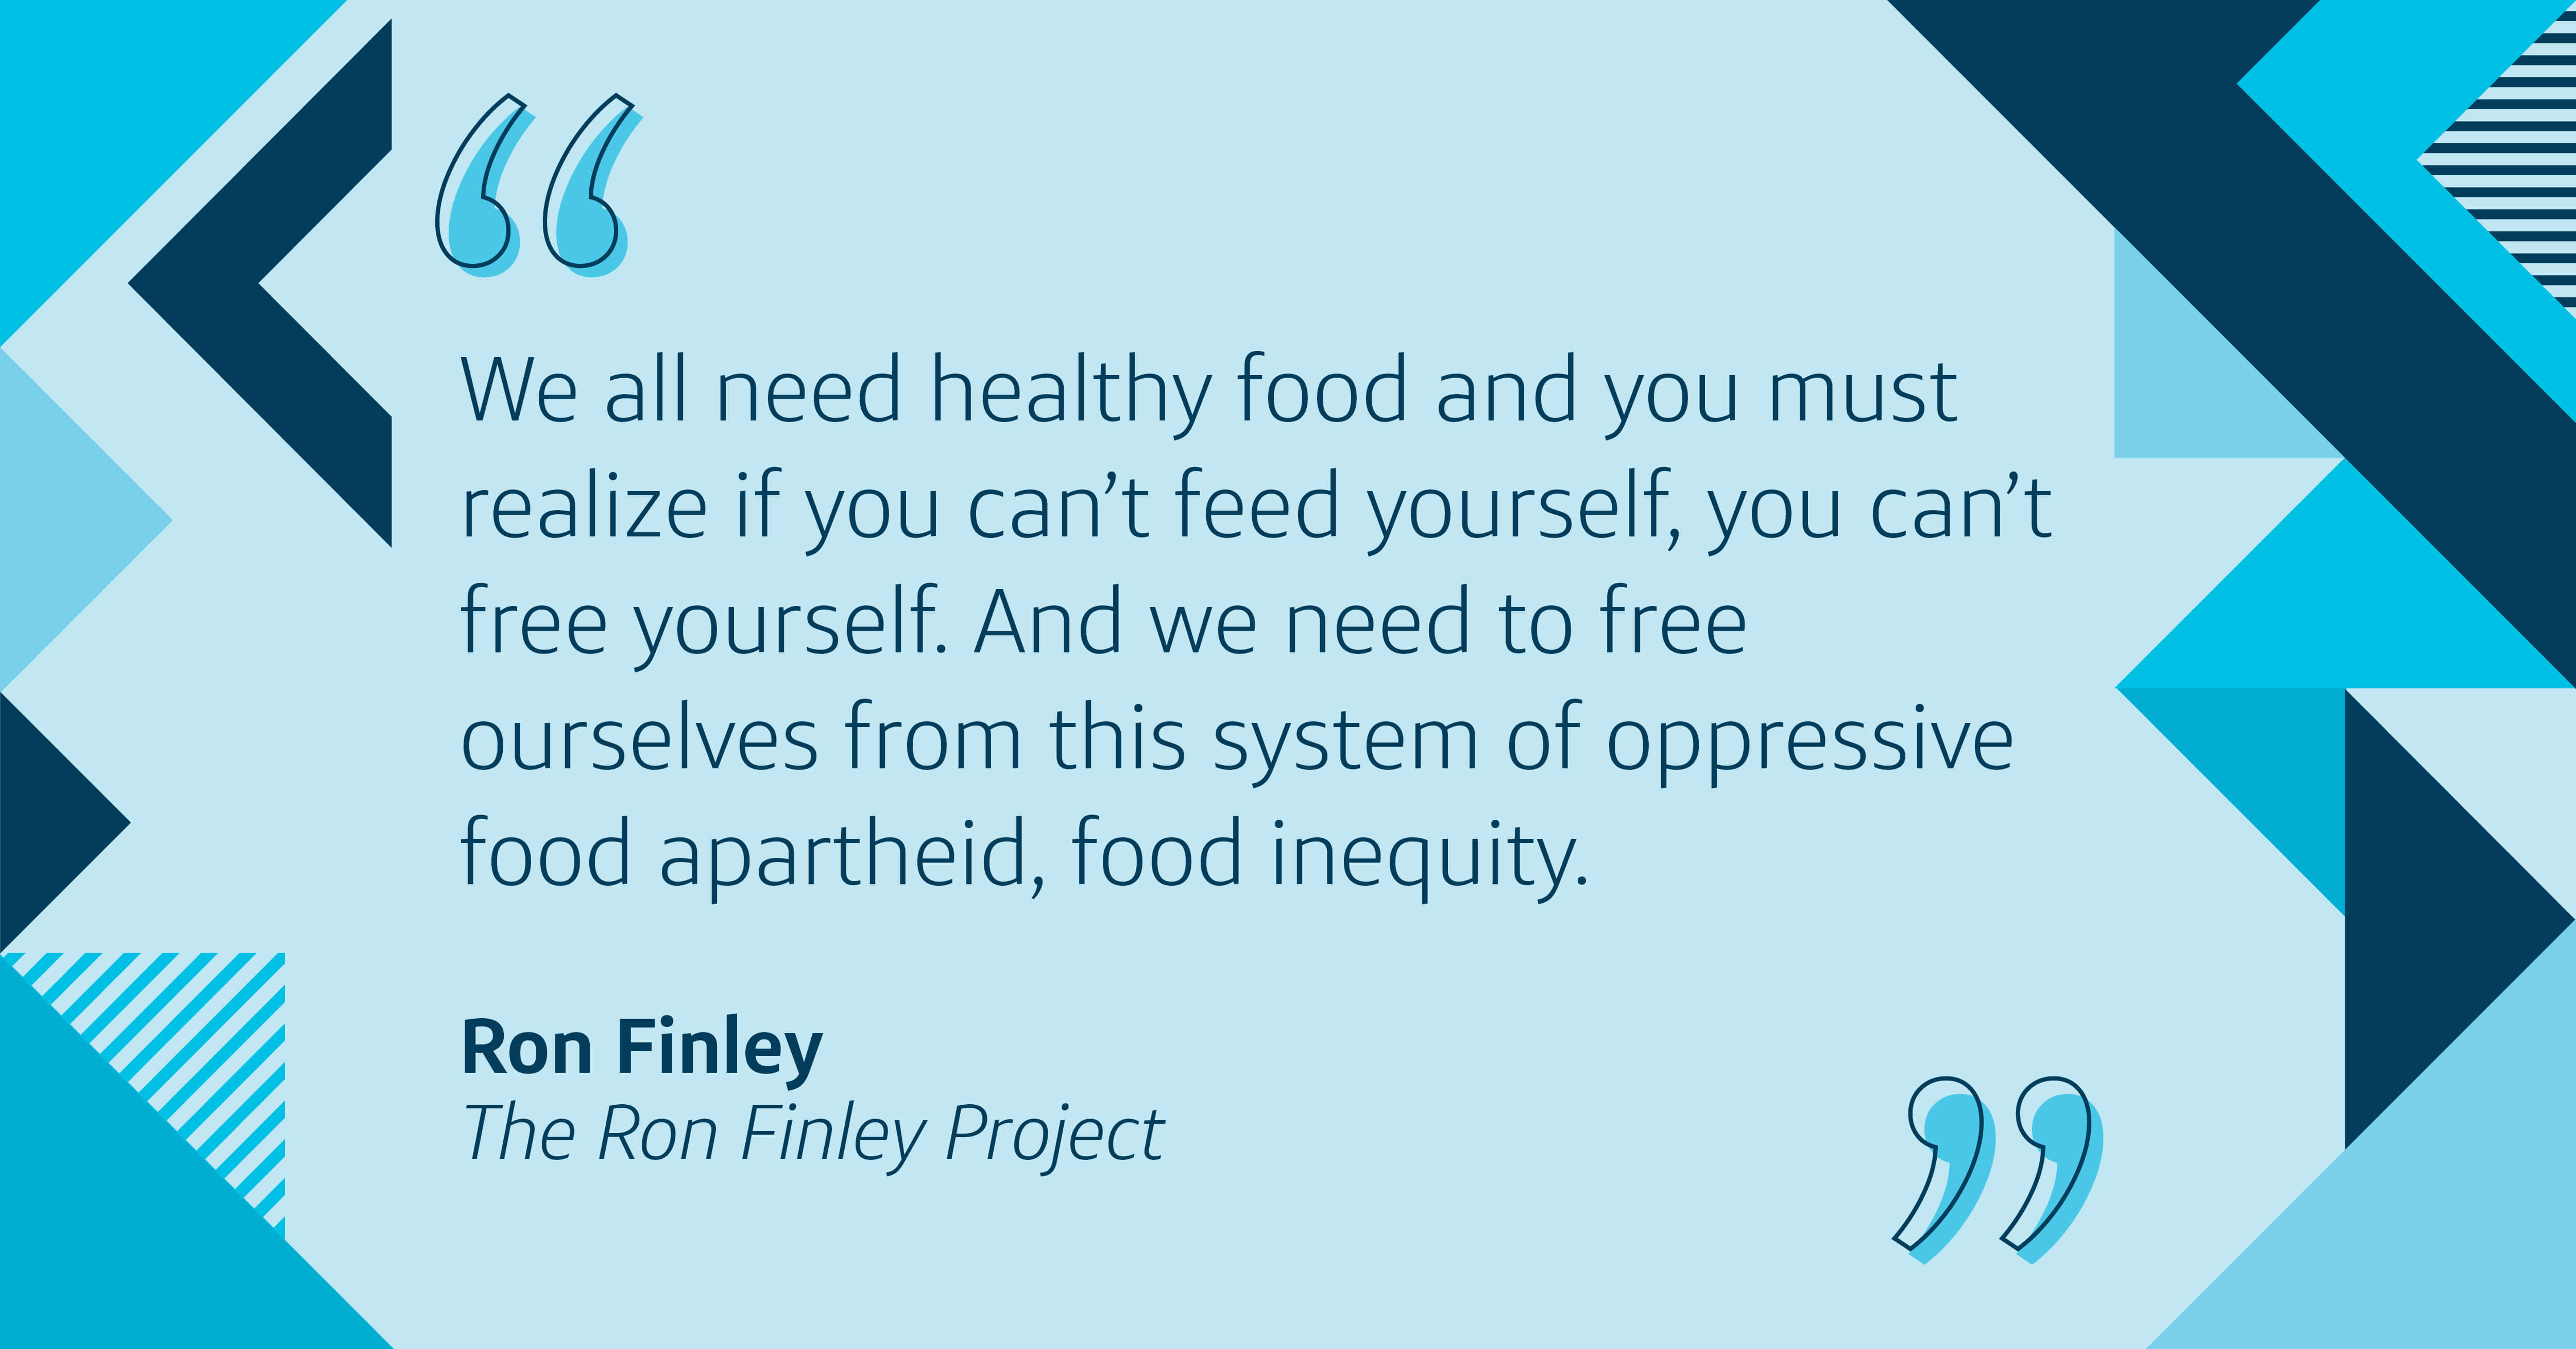 We all need healthy food and you must realize if you can’t feed yourself, you can’t free yourself. And we need to free ourselves from this system of oppressive food apartheid, food inequity